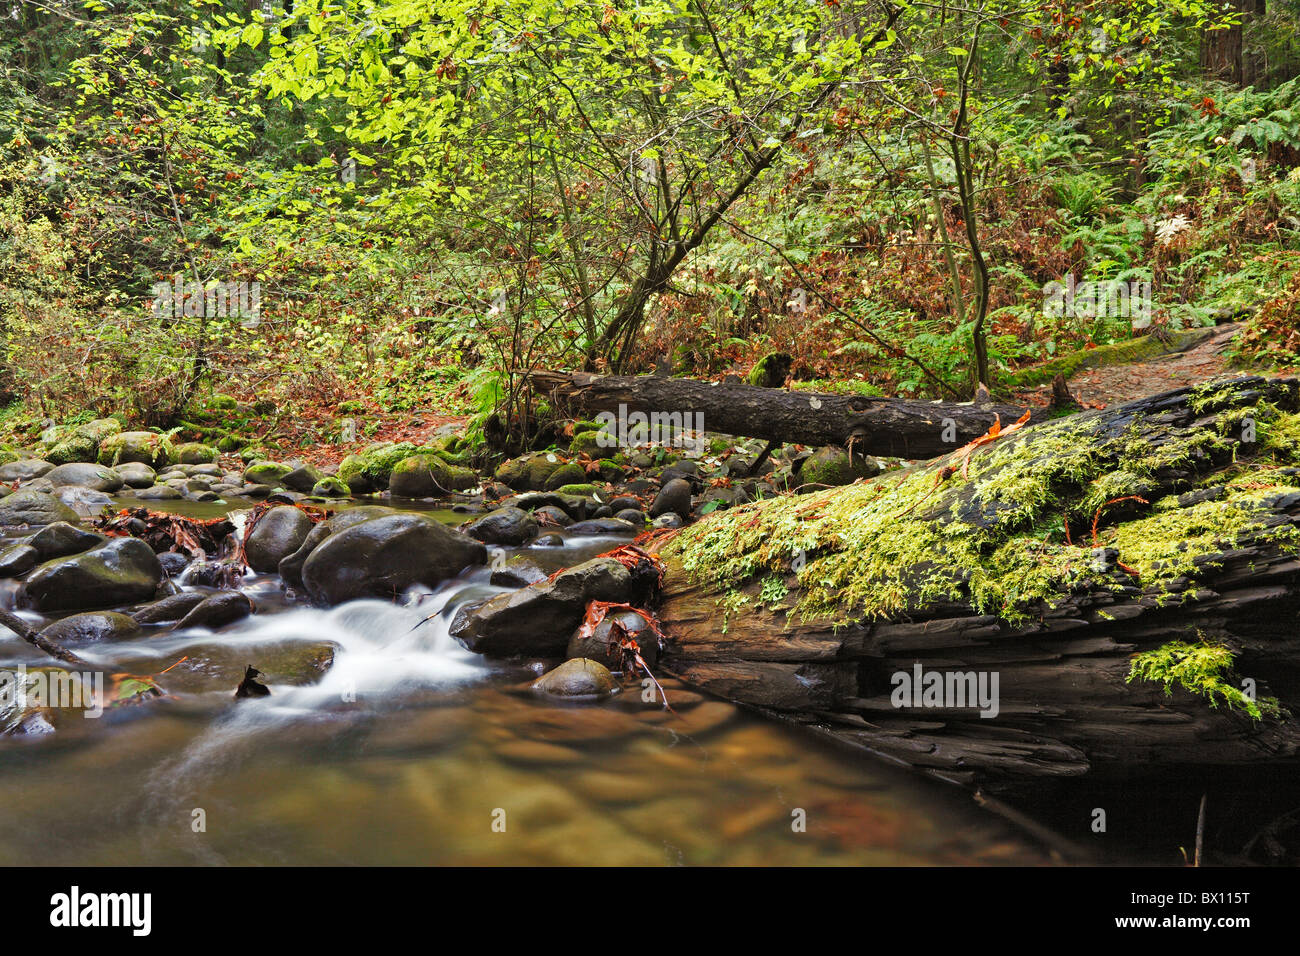 Moss covered fallen log in flowing forest creek Stock Photo